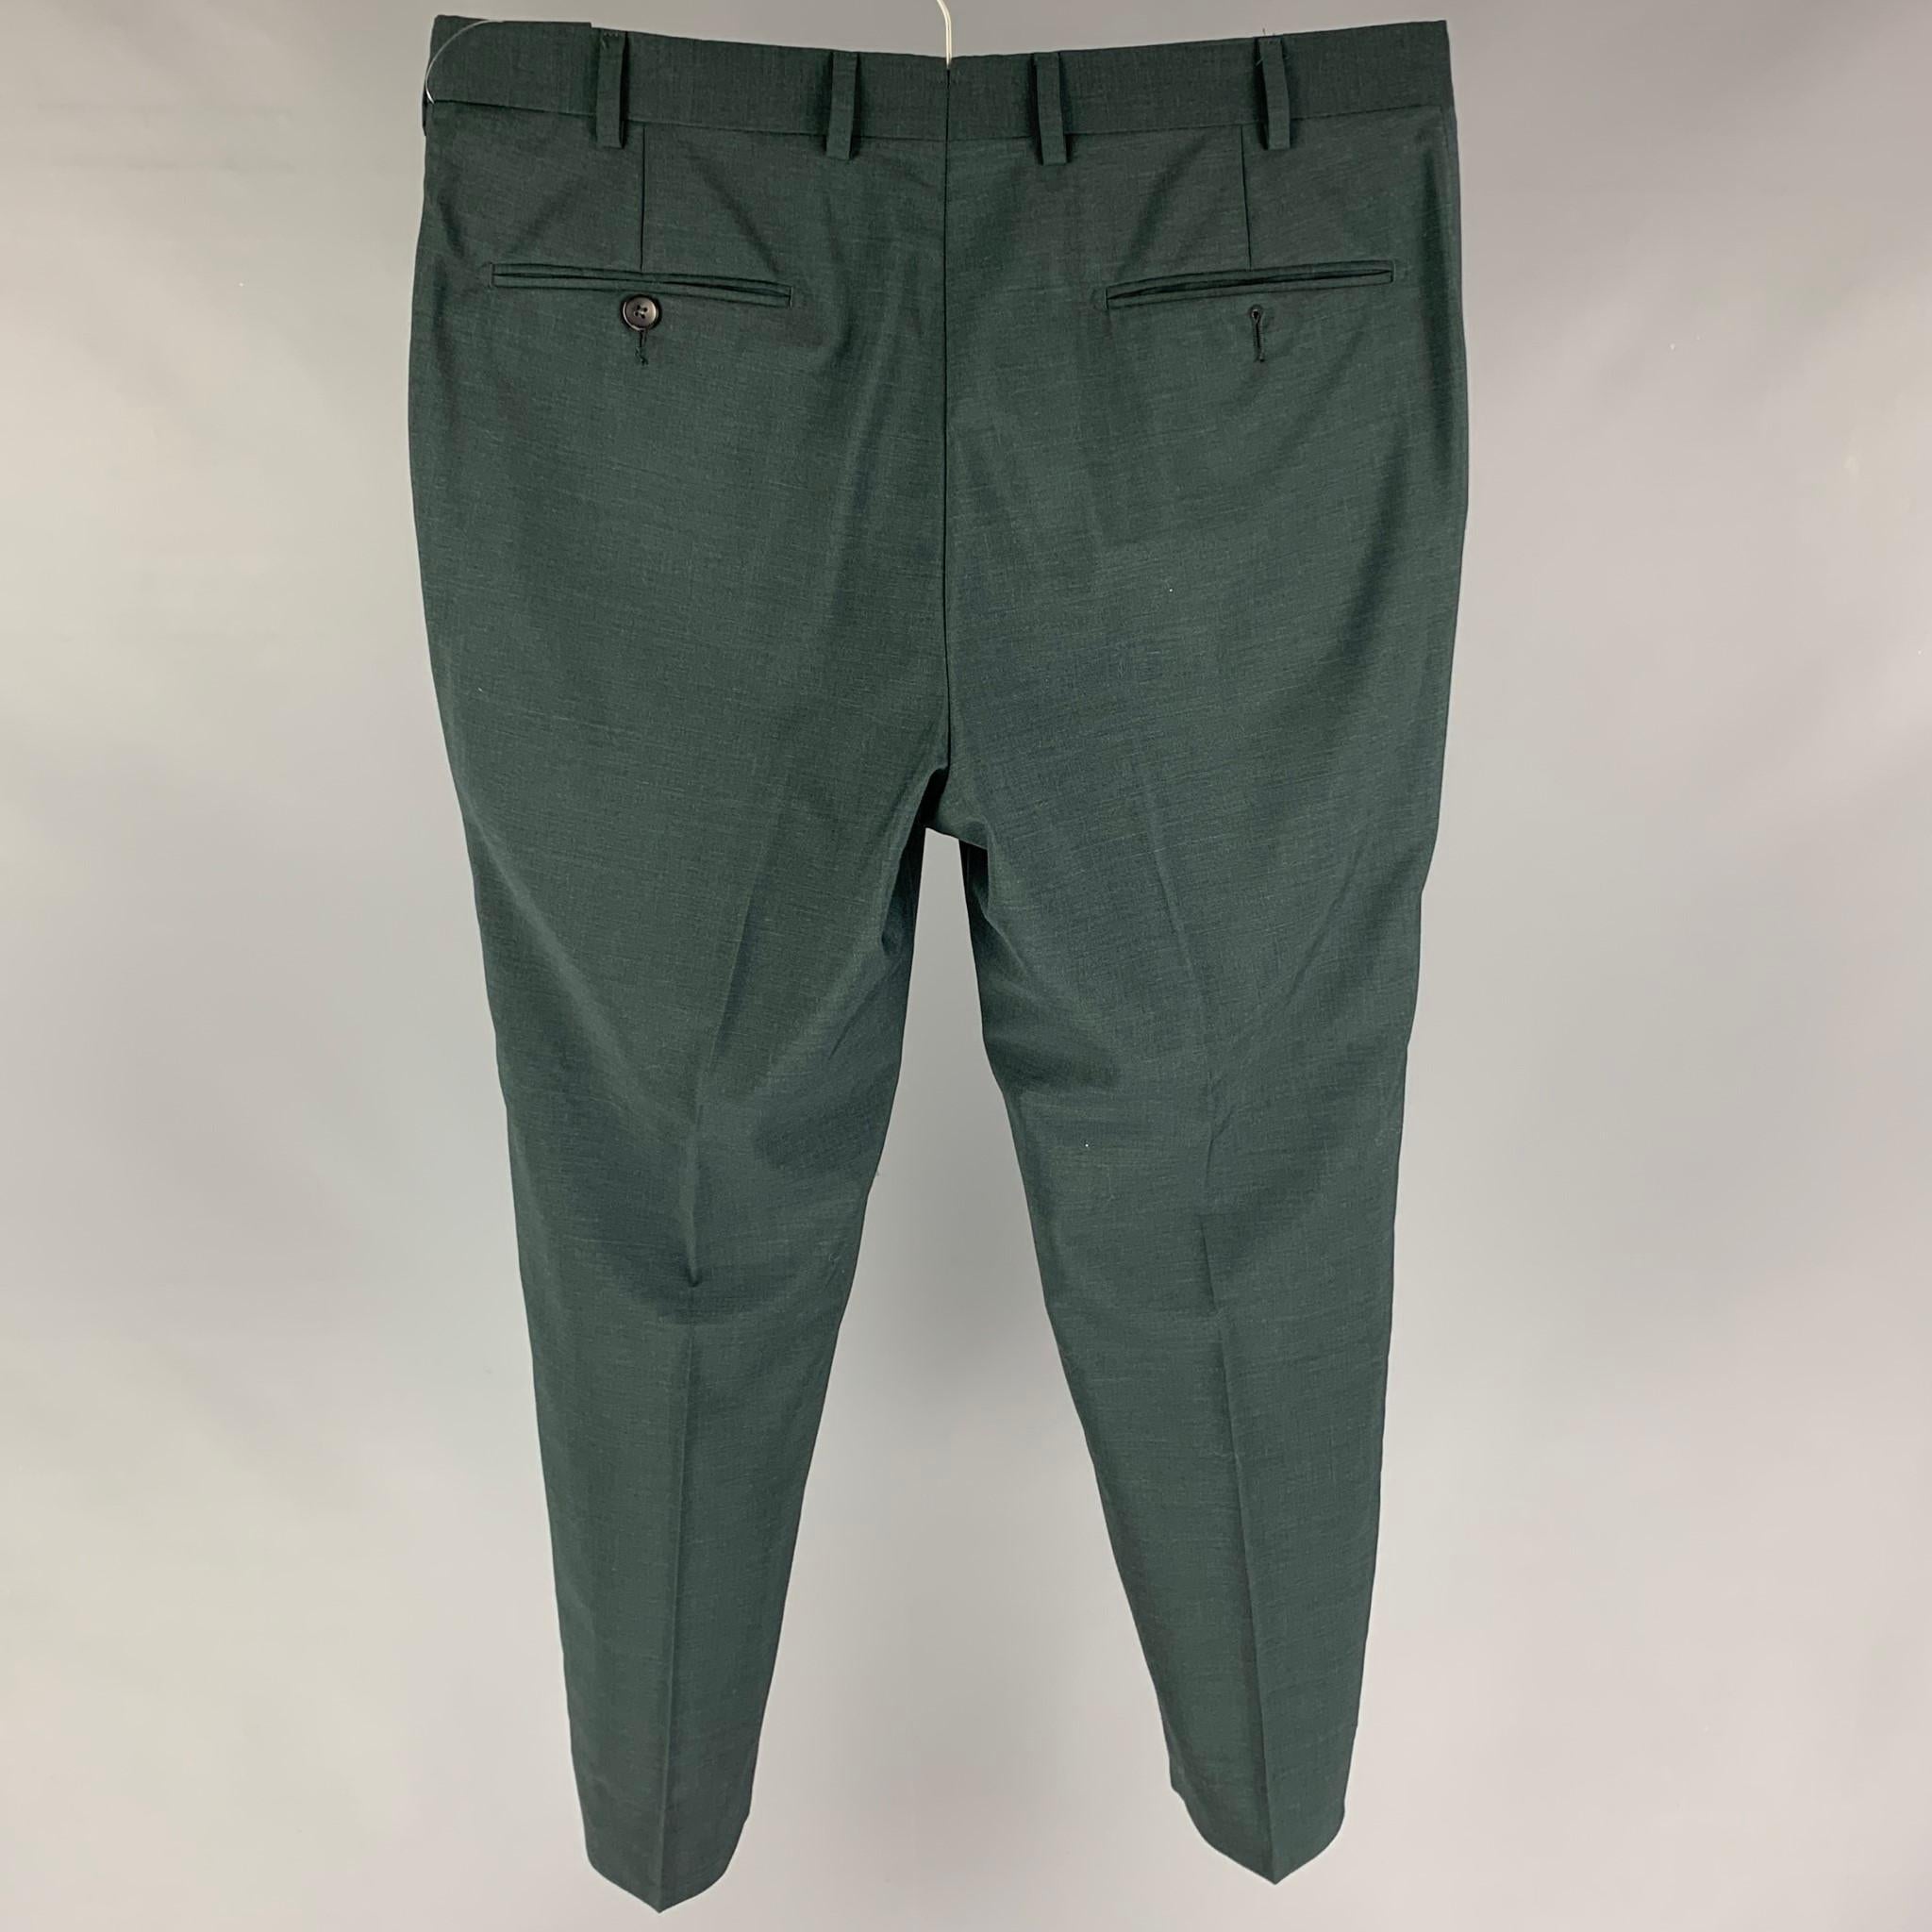 SUIT SUPPLY dress pants comes in a forest green wool featuring a flat front, slim fit, and a zip fly closure. 

Excellent Pre-Owned Condition.
Marked: 50

Measurements:

Waist: 34 in.
Rise: 10.5 in.
Inseam: 28 in.
Leg Opening: 13 in.

 